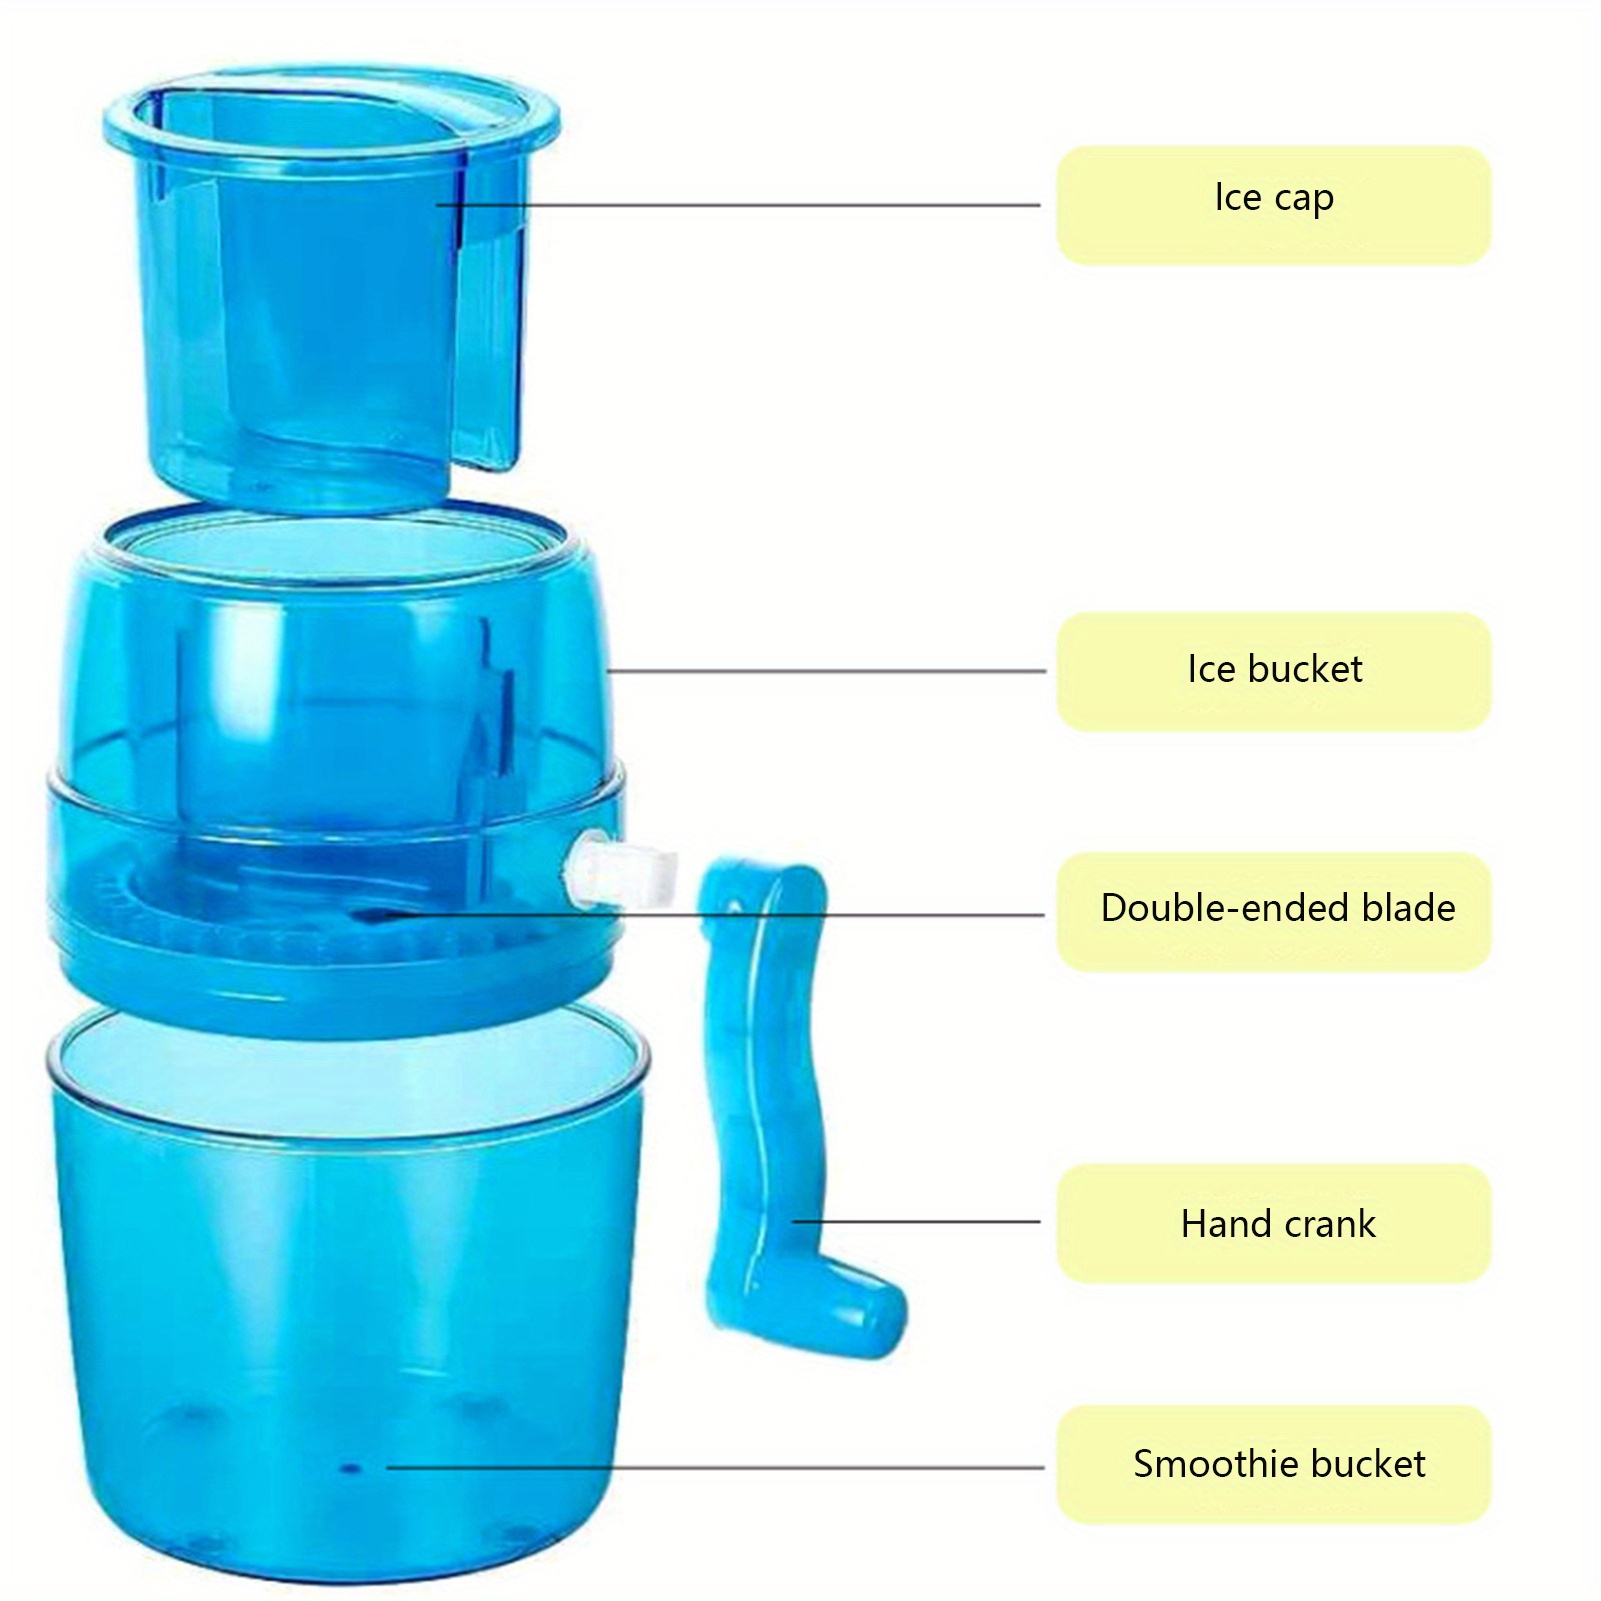 refresh your summer with a portable manual ice crusher great for home use details 2